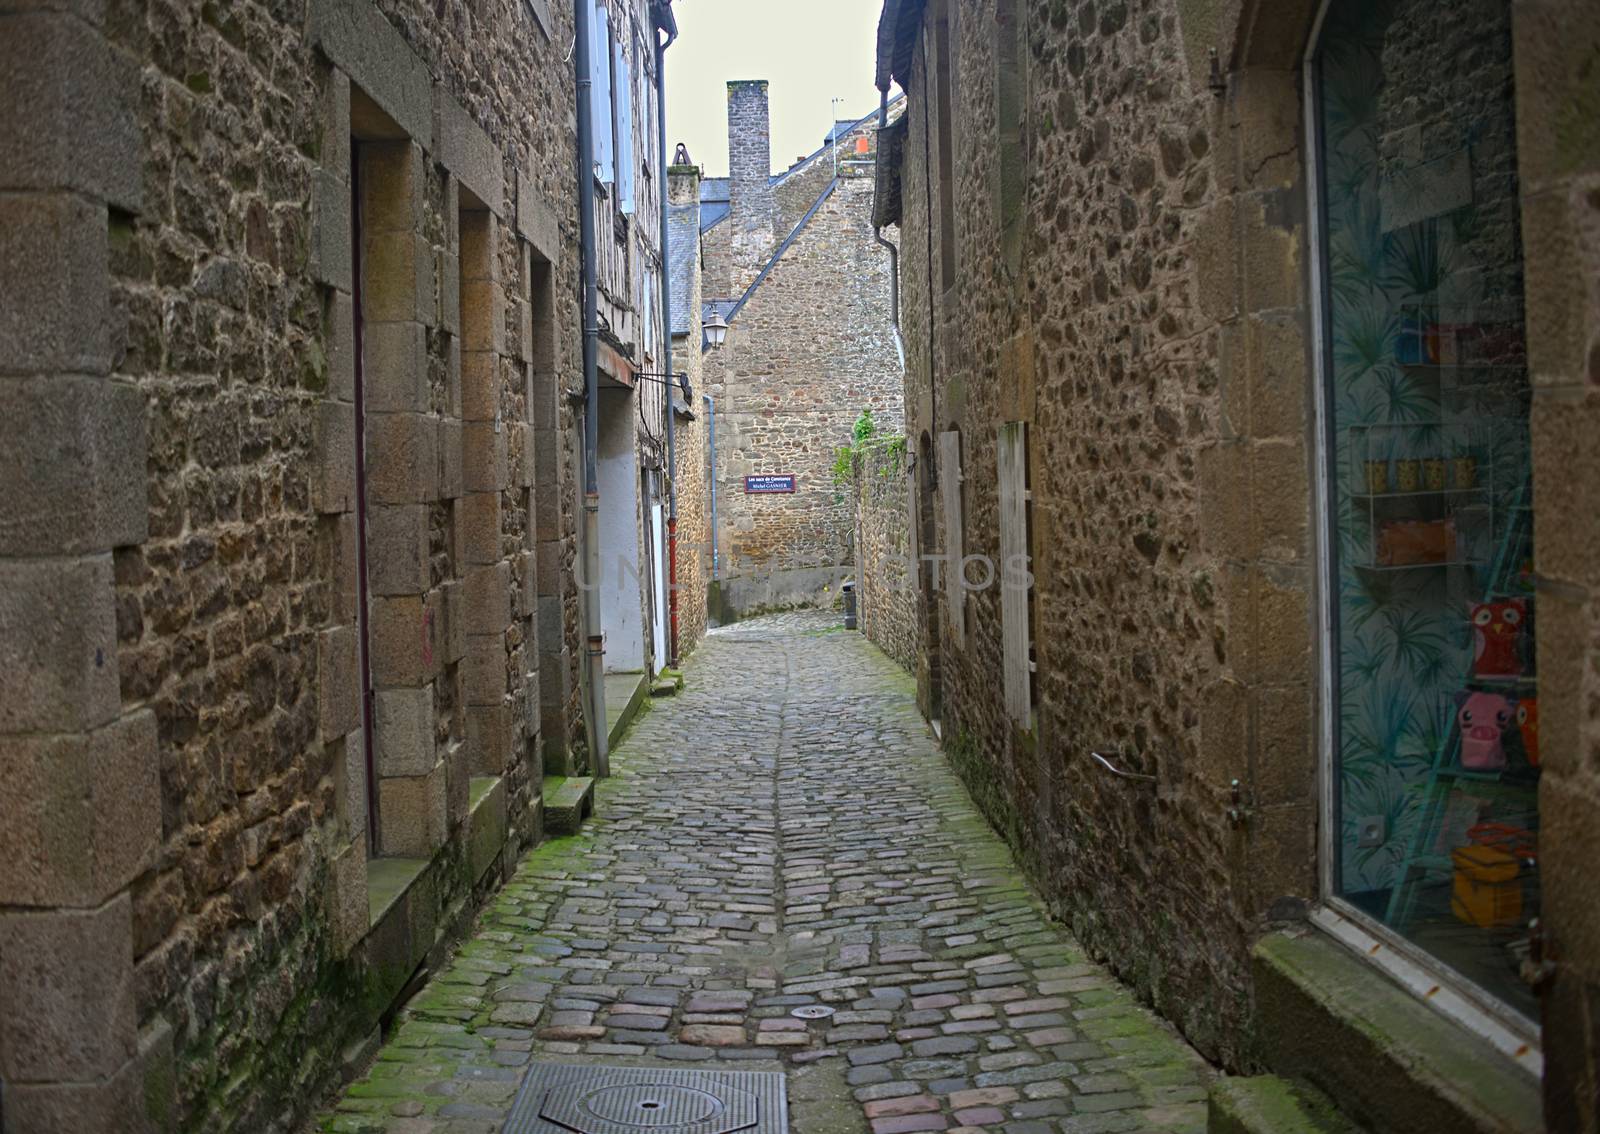 DINAN, FRANCE - April 7th 2019 - Old traditional narrow alley with houses made of stone in small french town by sheriffkule